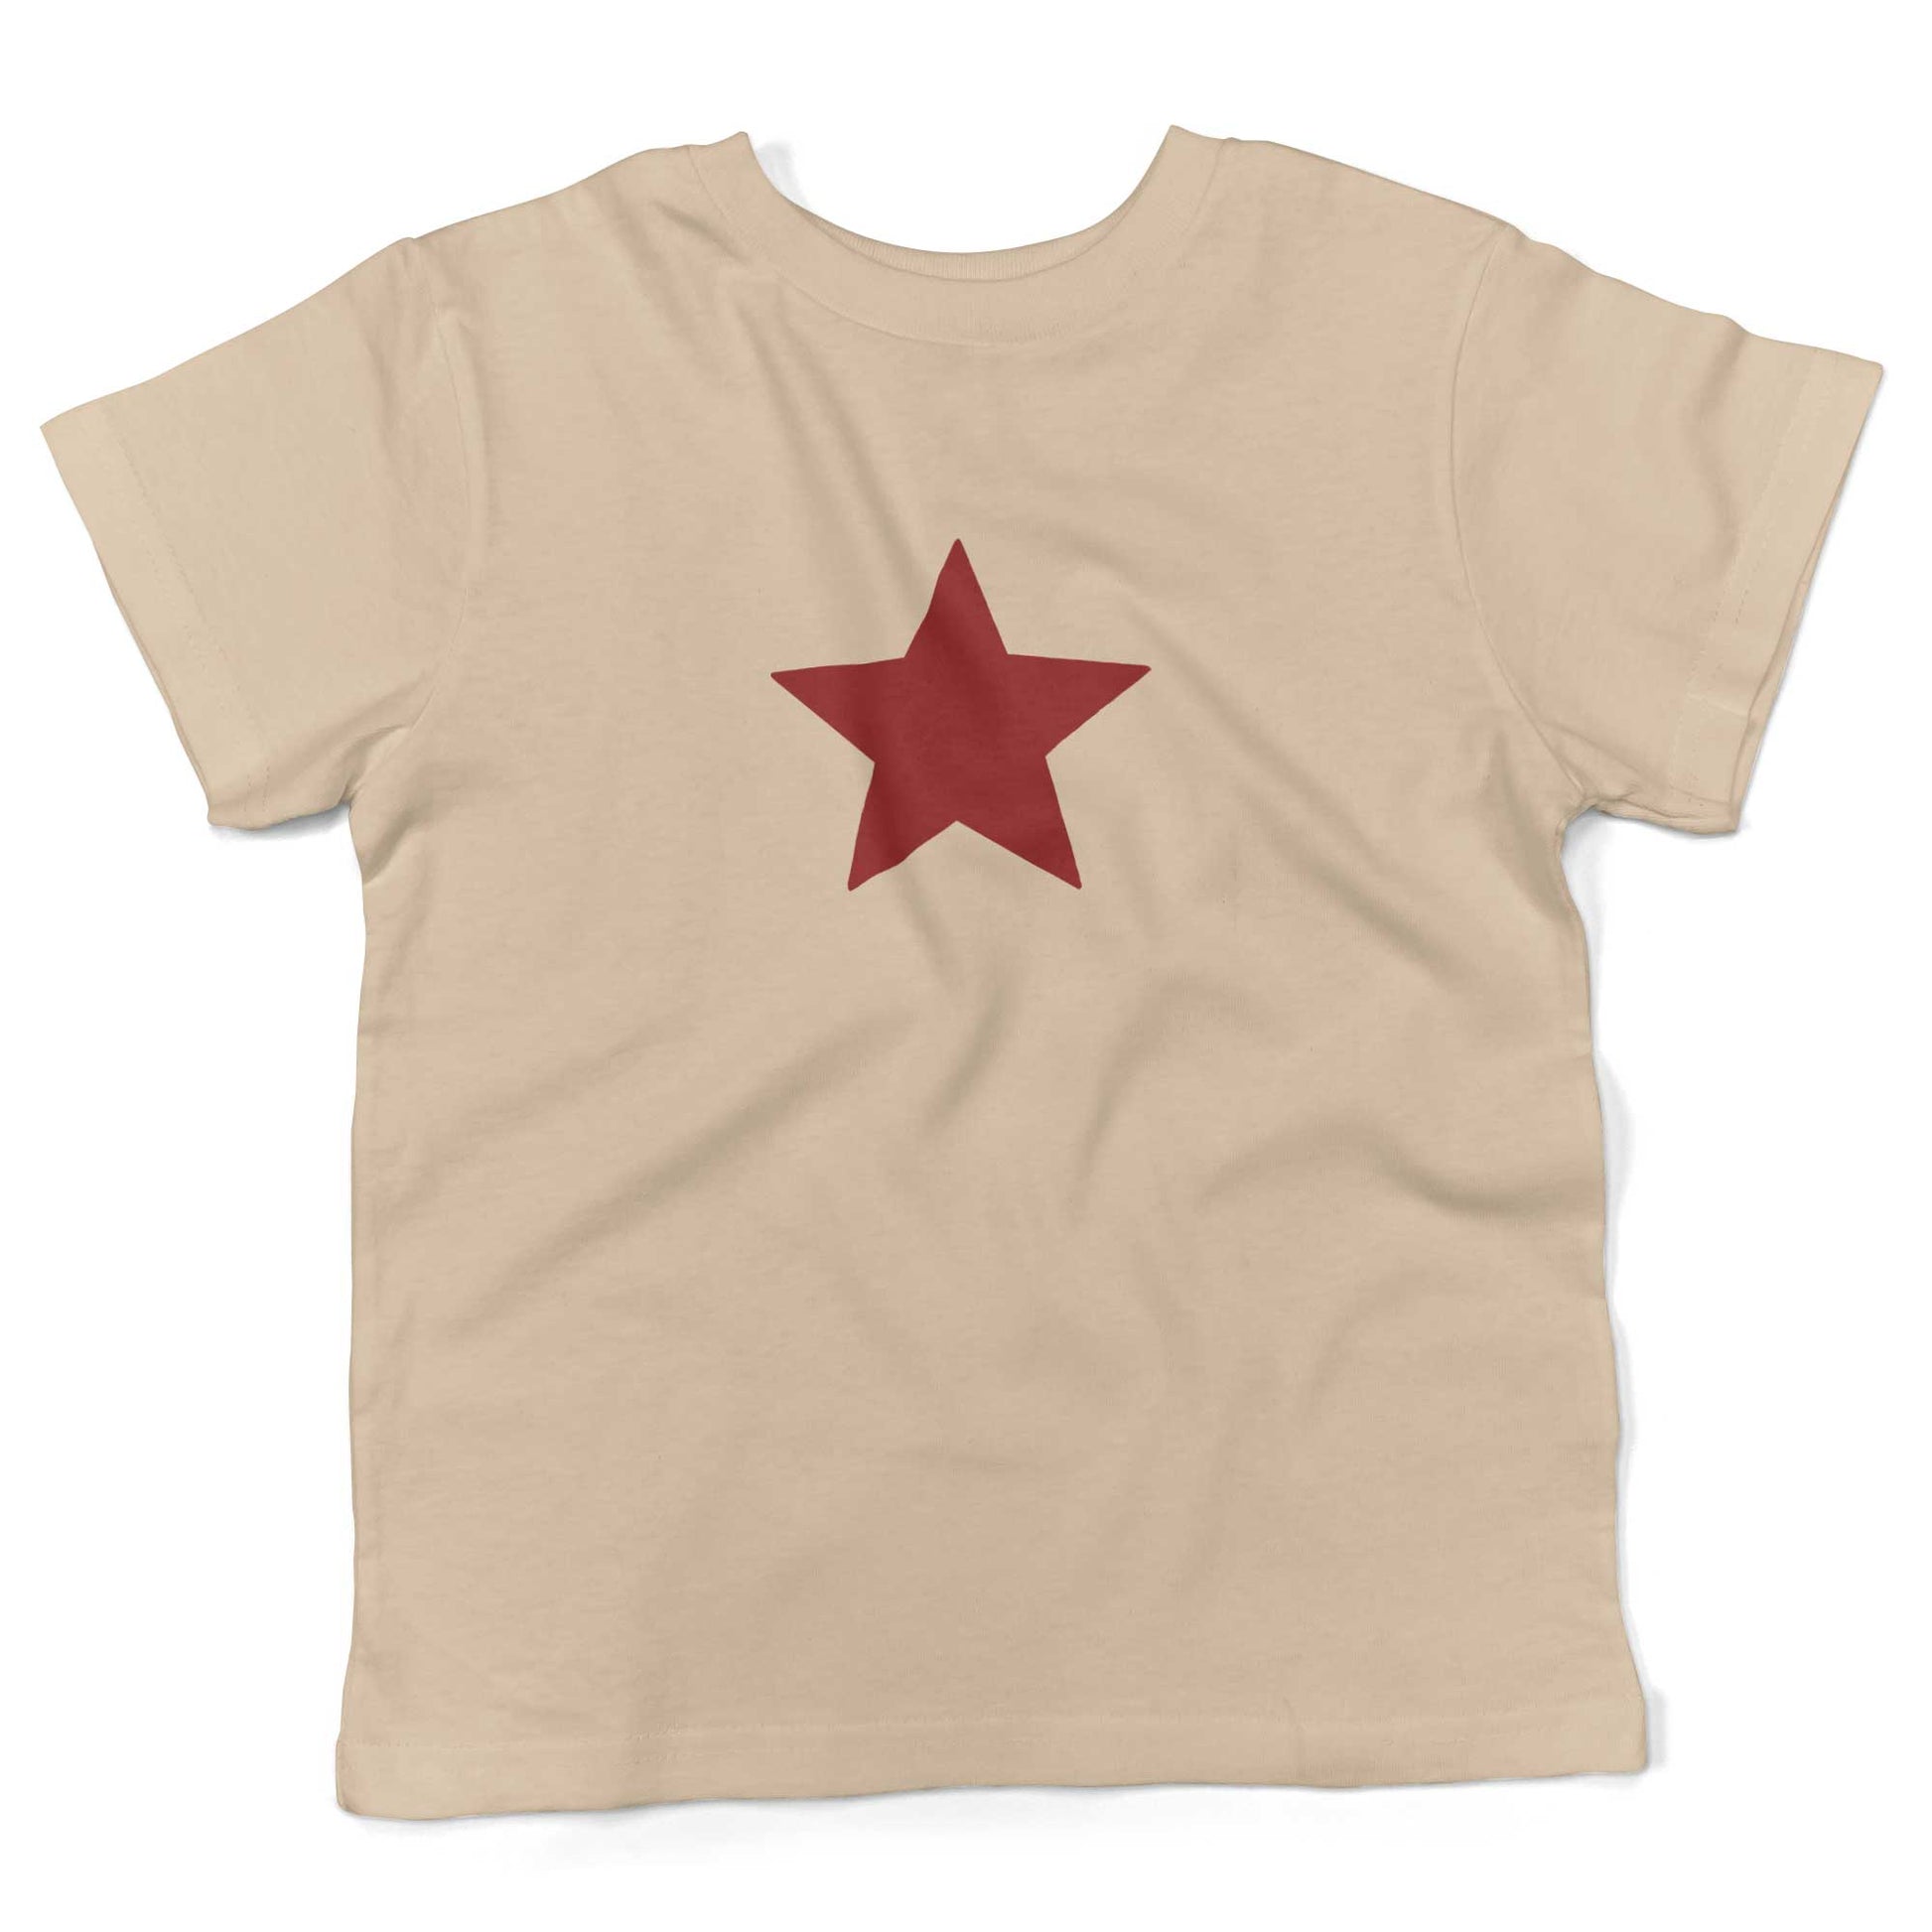 Five-Point Star Toddler Shirt-Organic Natural-Red Star